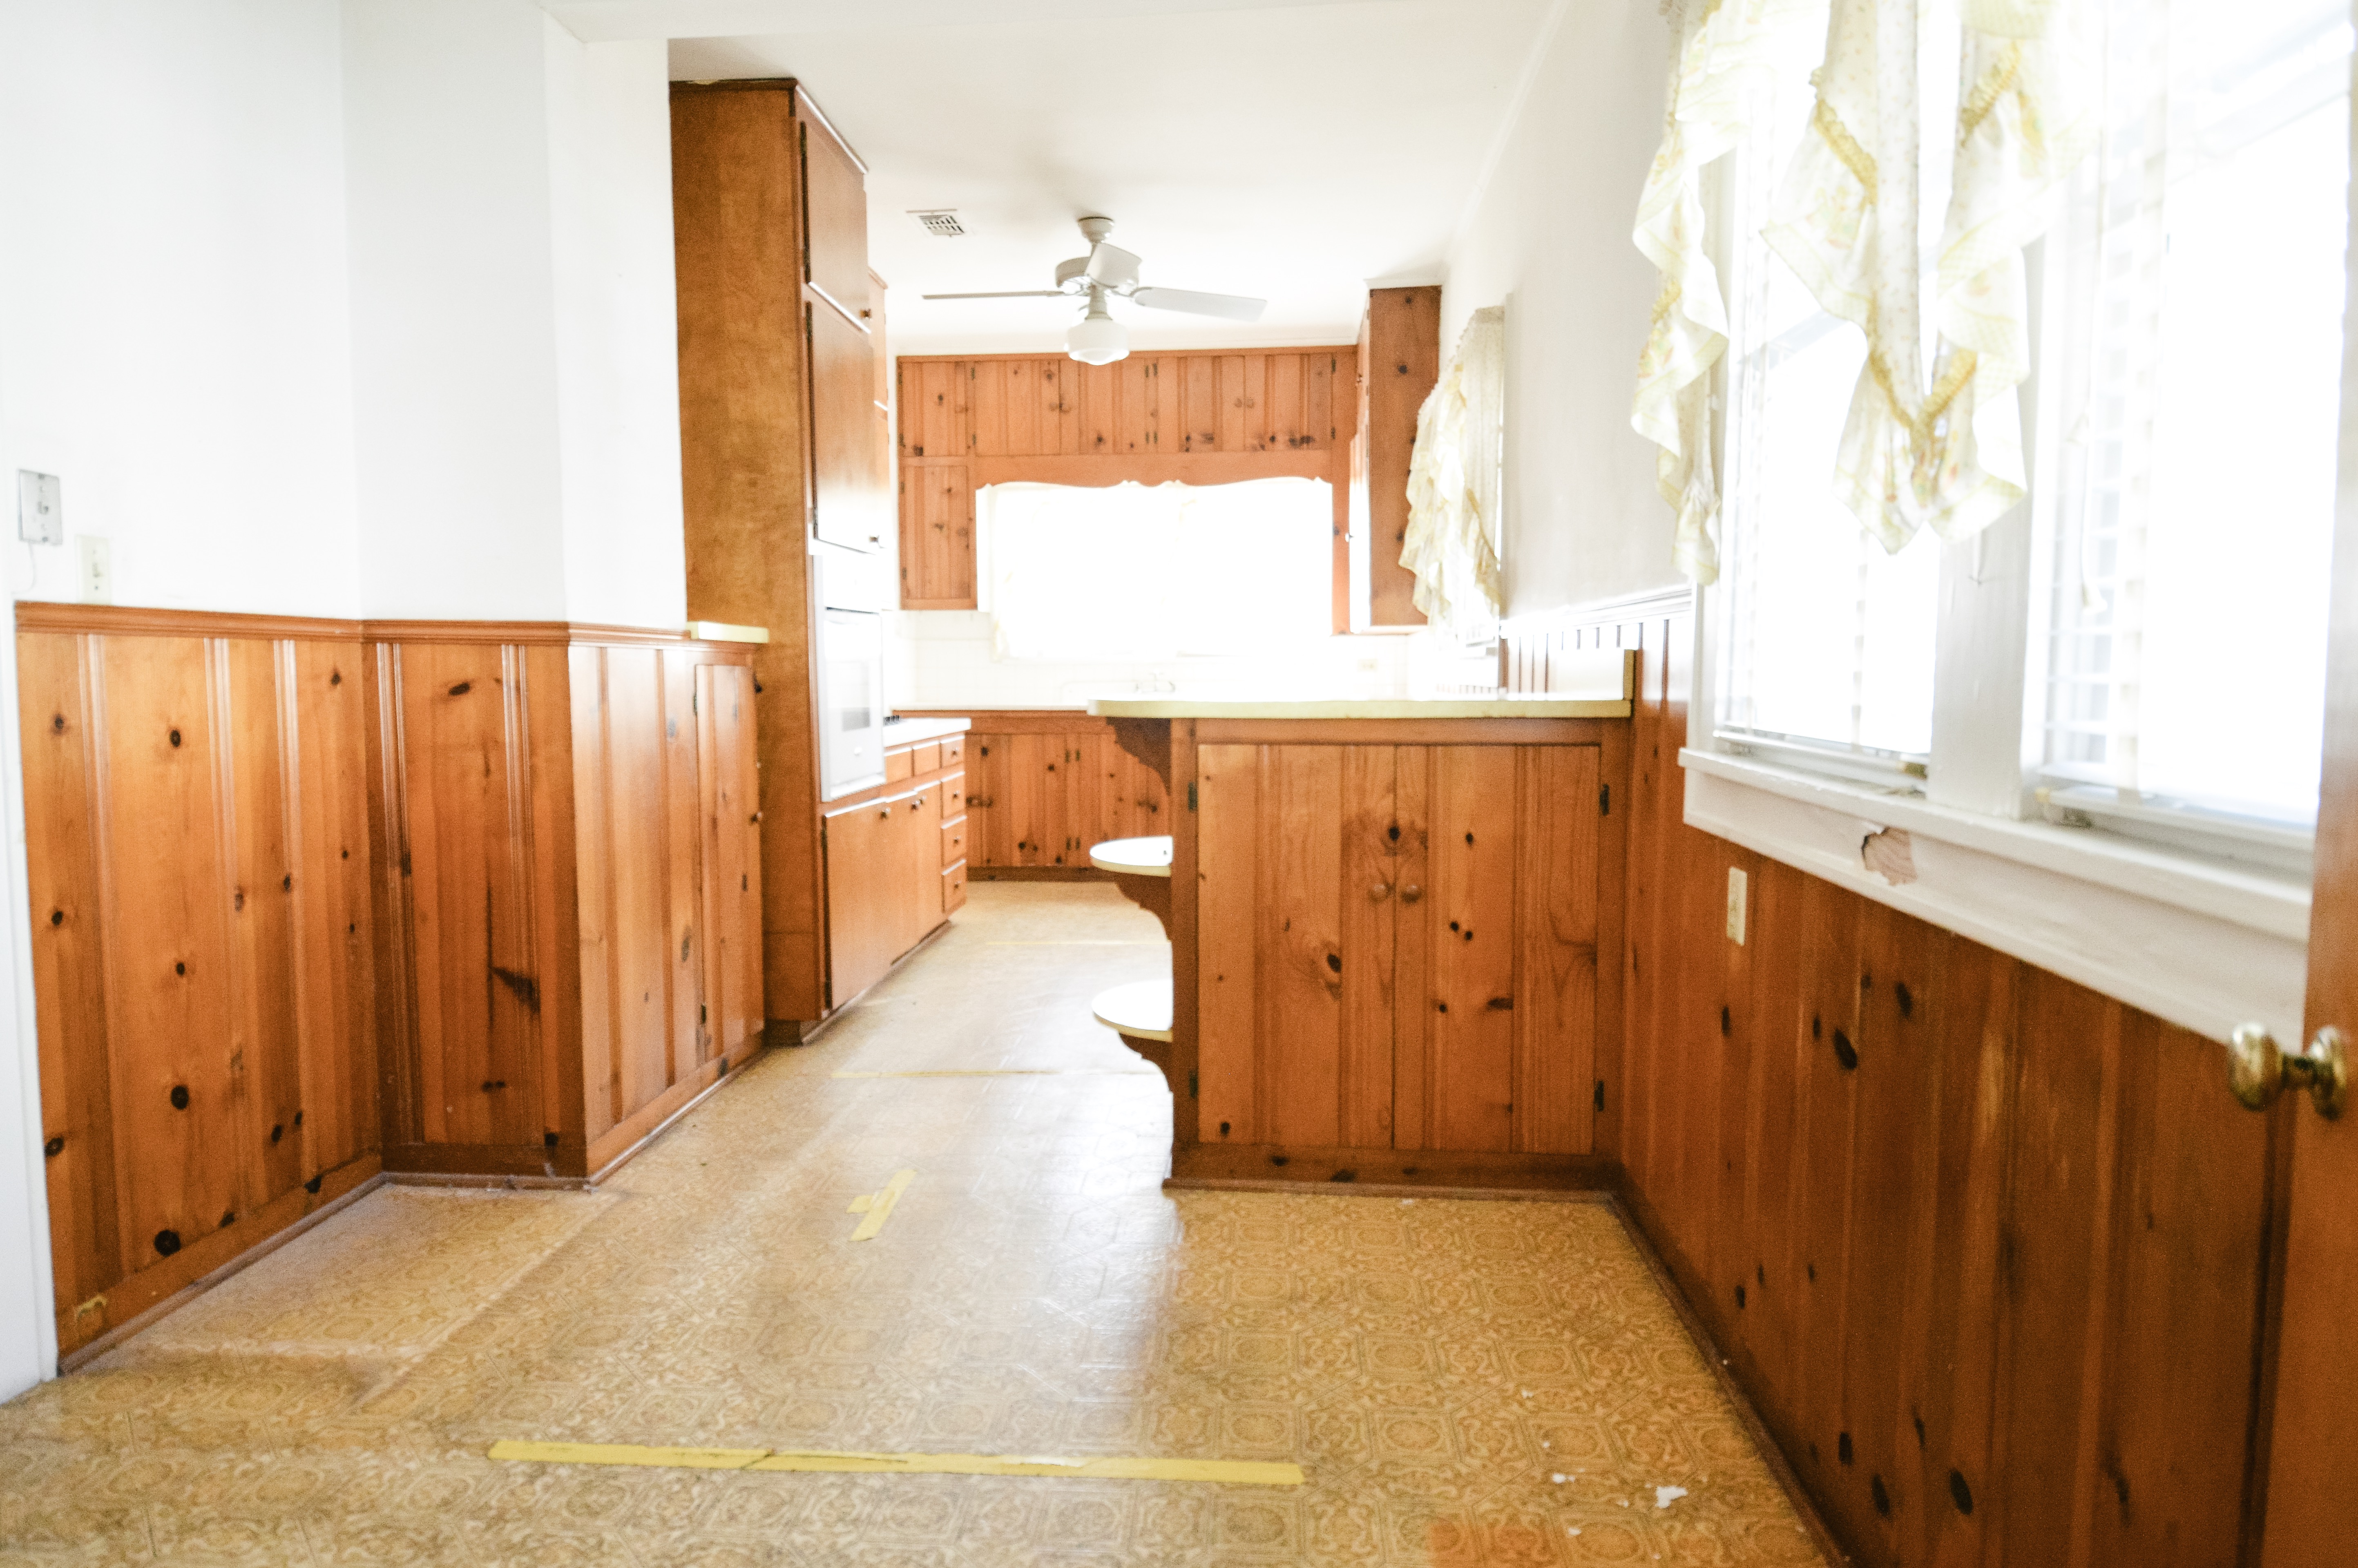 A 101-year-old house transformation! Before the flip process